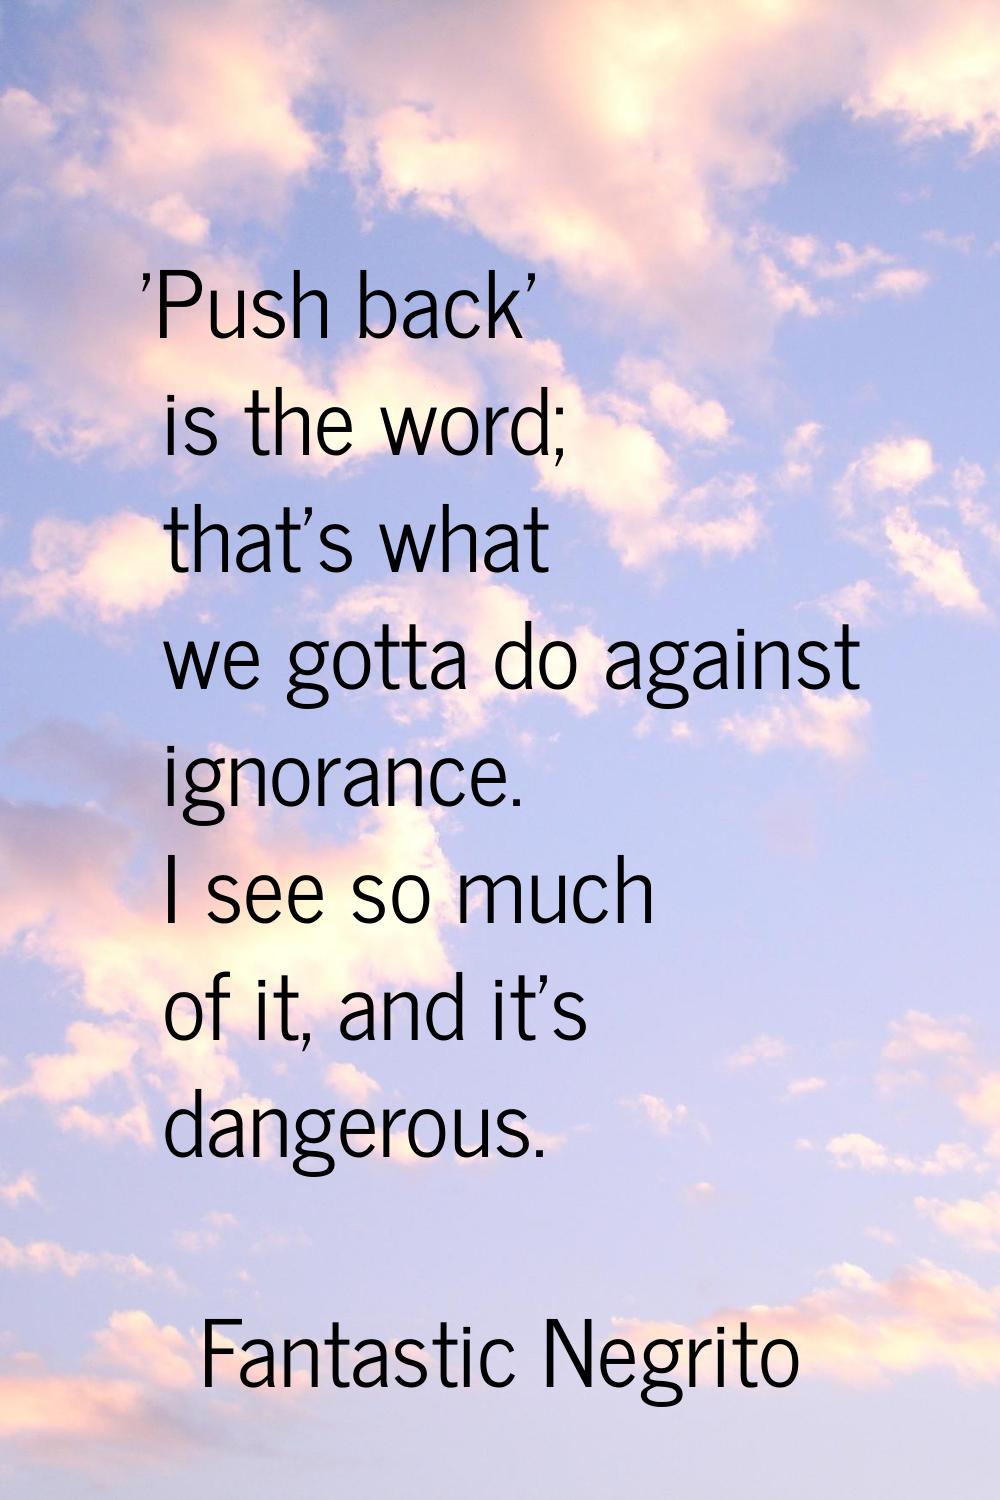 'Push back' is the word; that's what we gotta do against ignorance. I see so much of it, and it's d